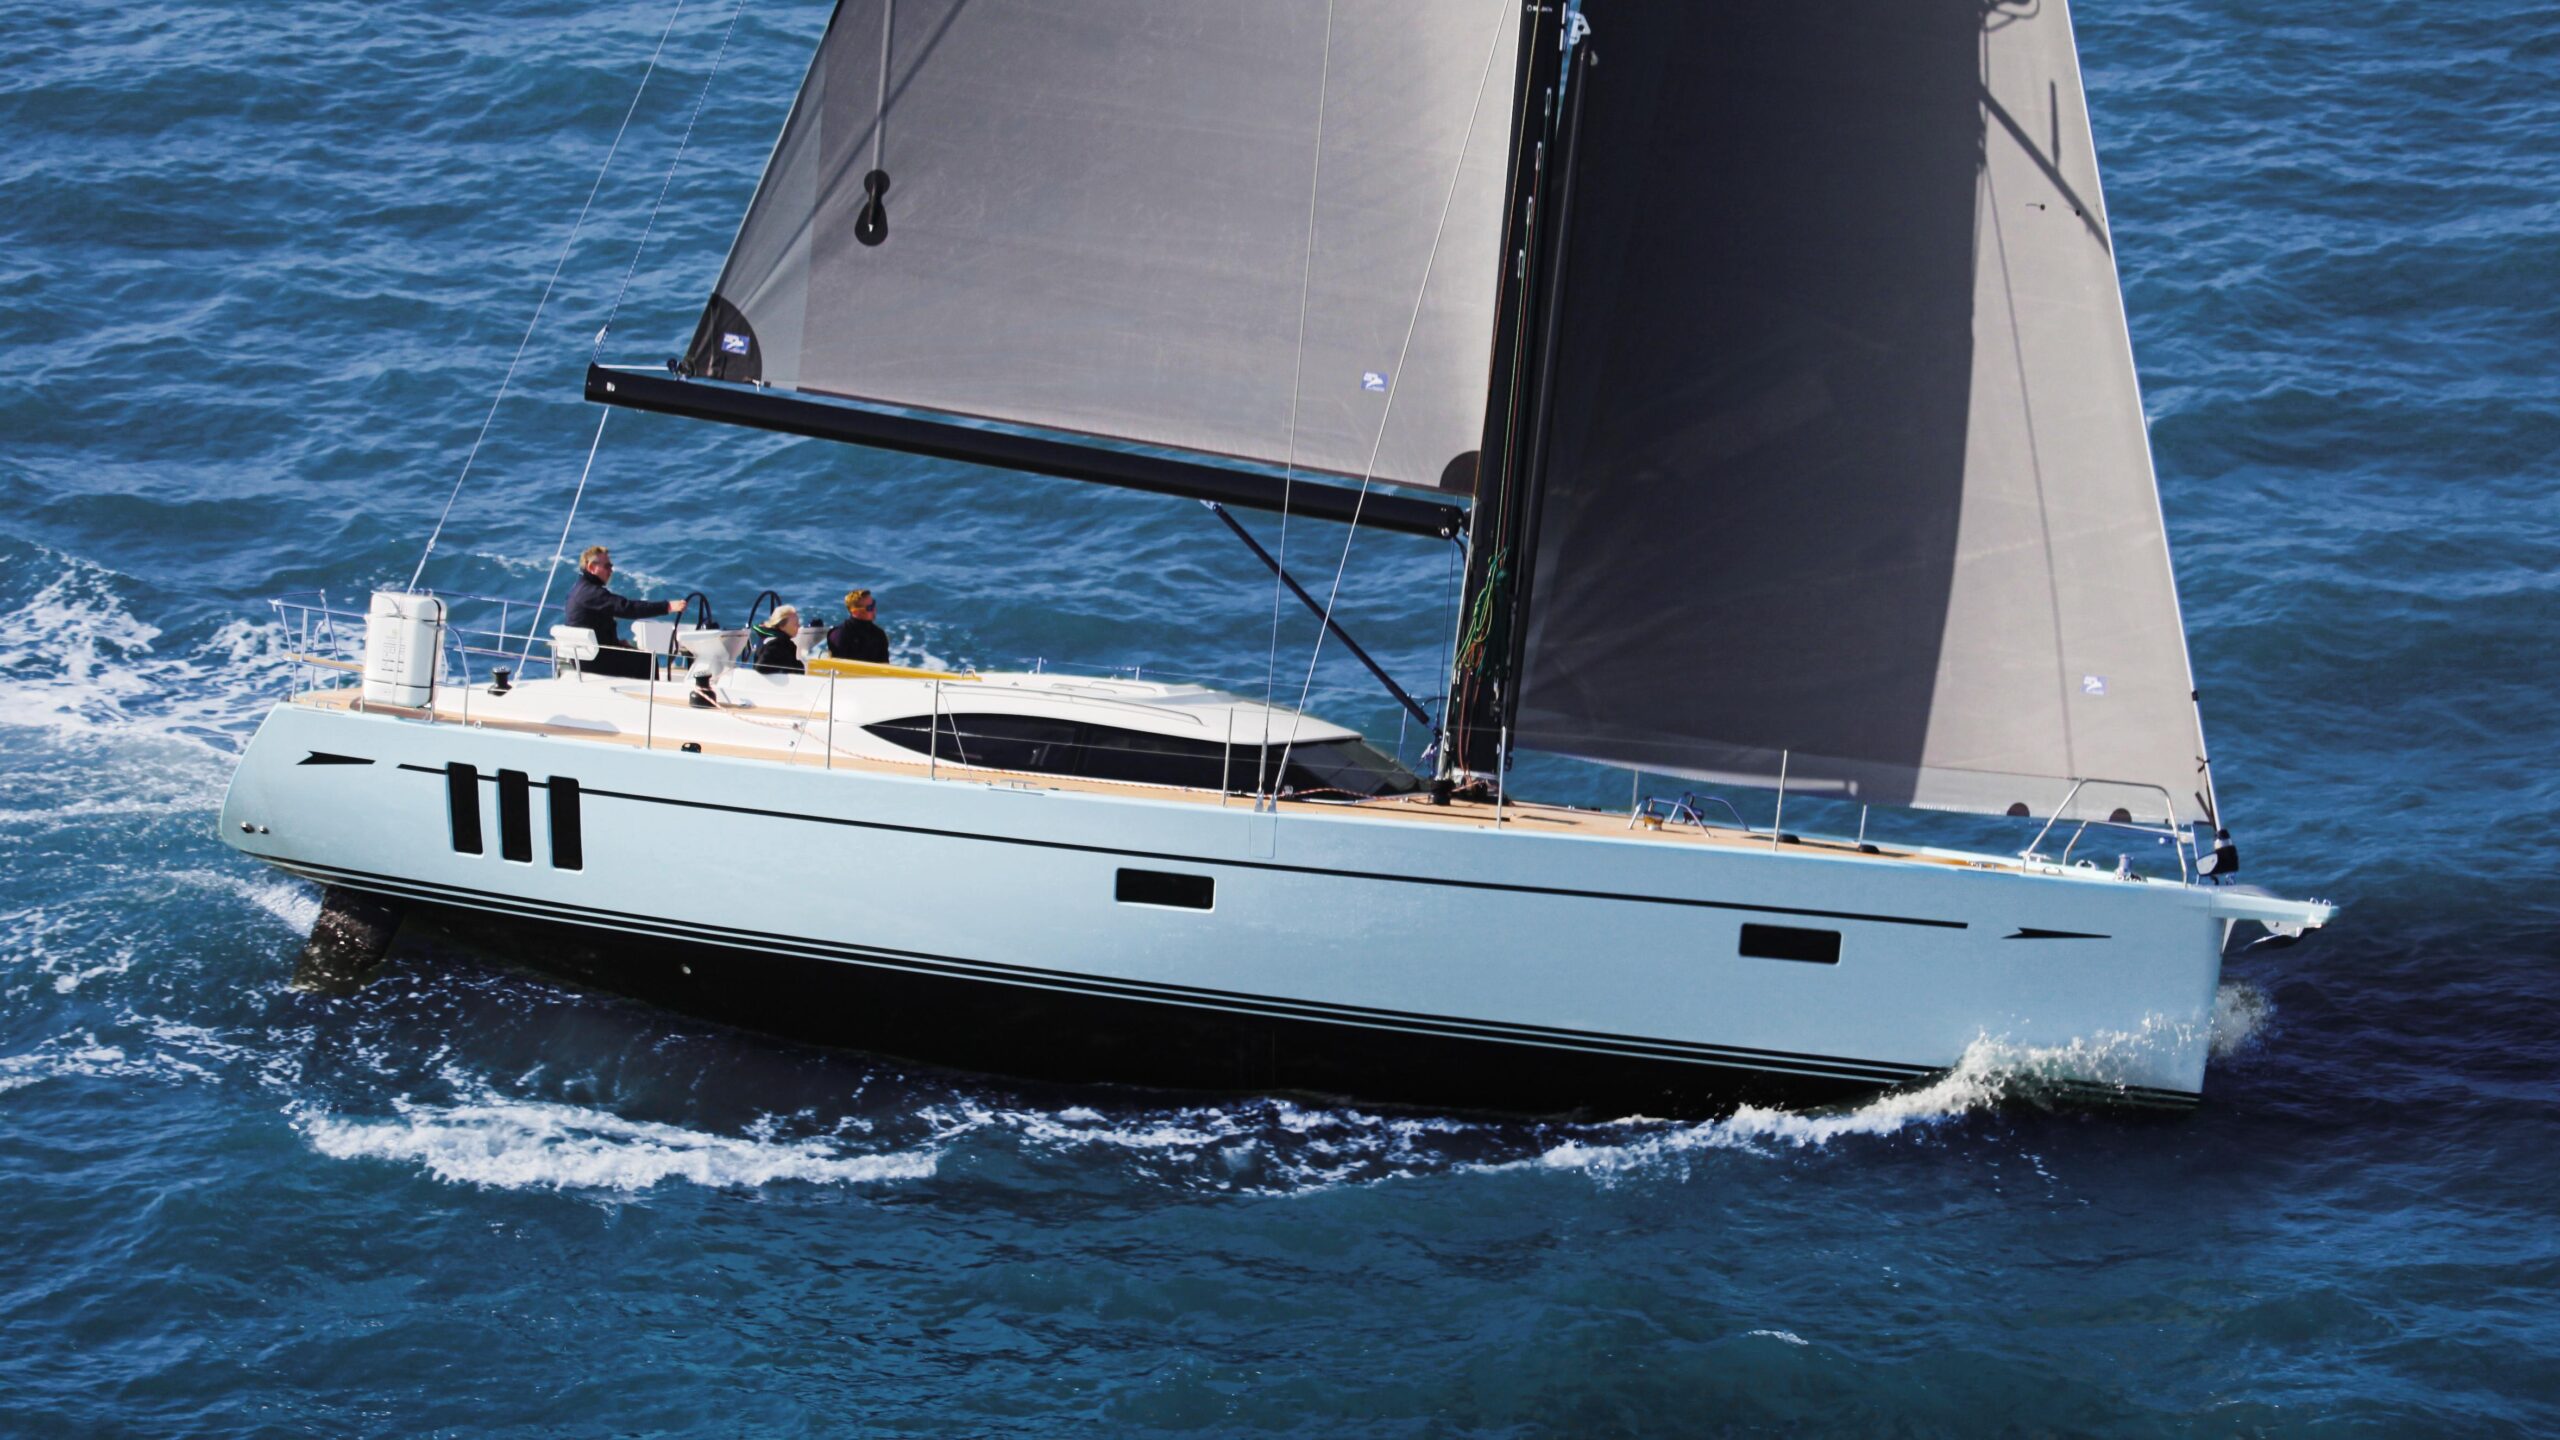 eBlue_economy_Oyster unveil her new Oyster 495 in a World Premiere that will visit Cannes Yachting Festival